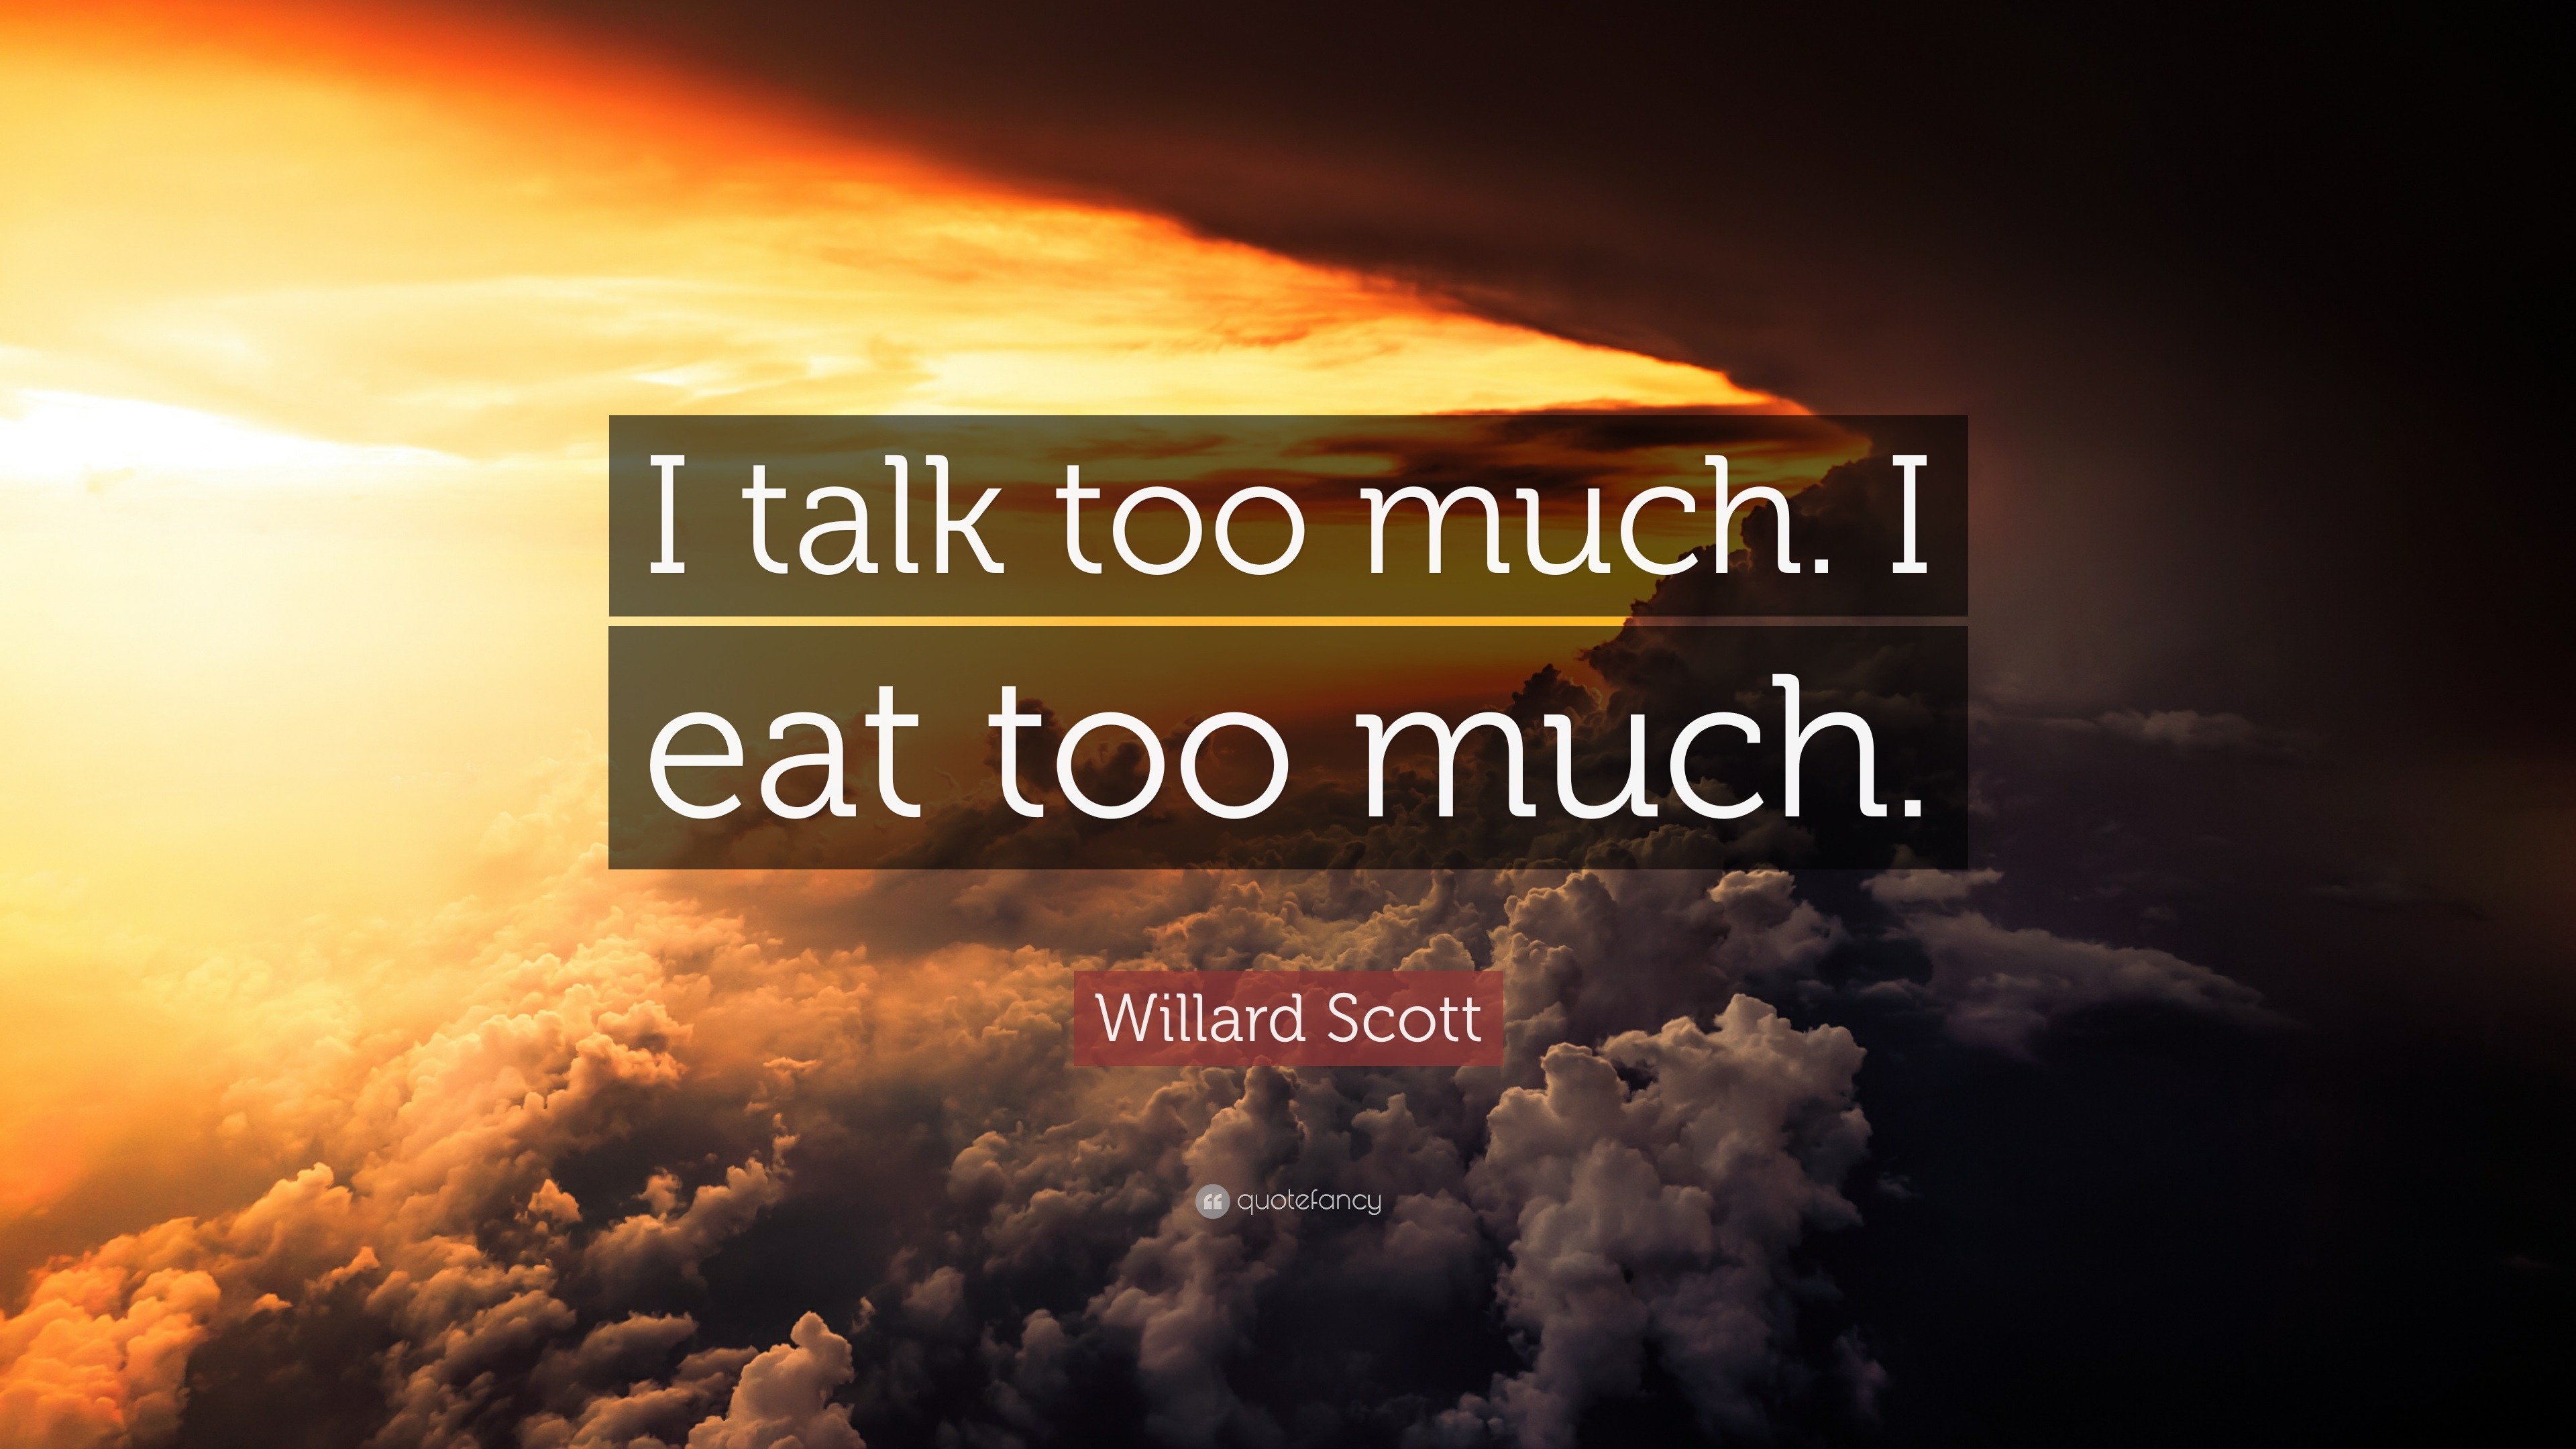 Willard Scott Quote “I talk too much. I eat too much.” (10 wallpapers